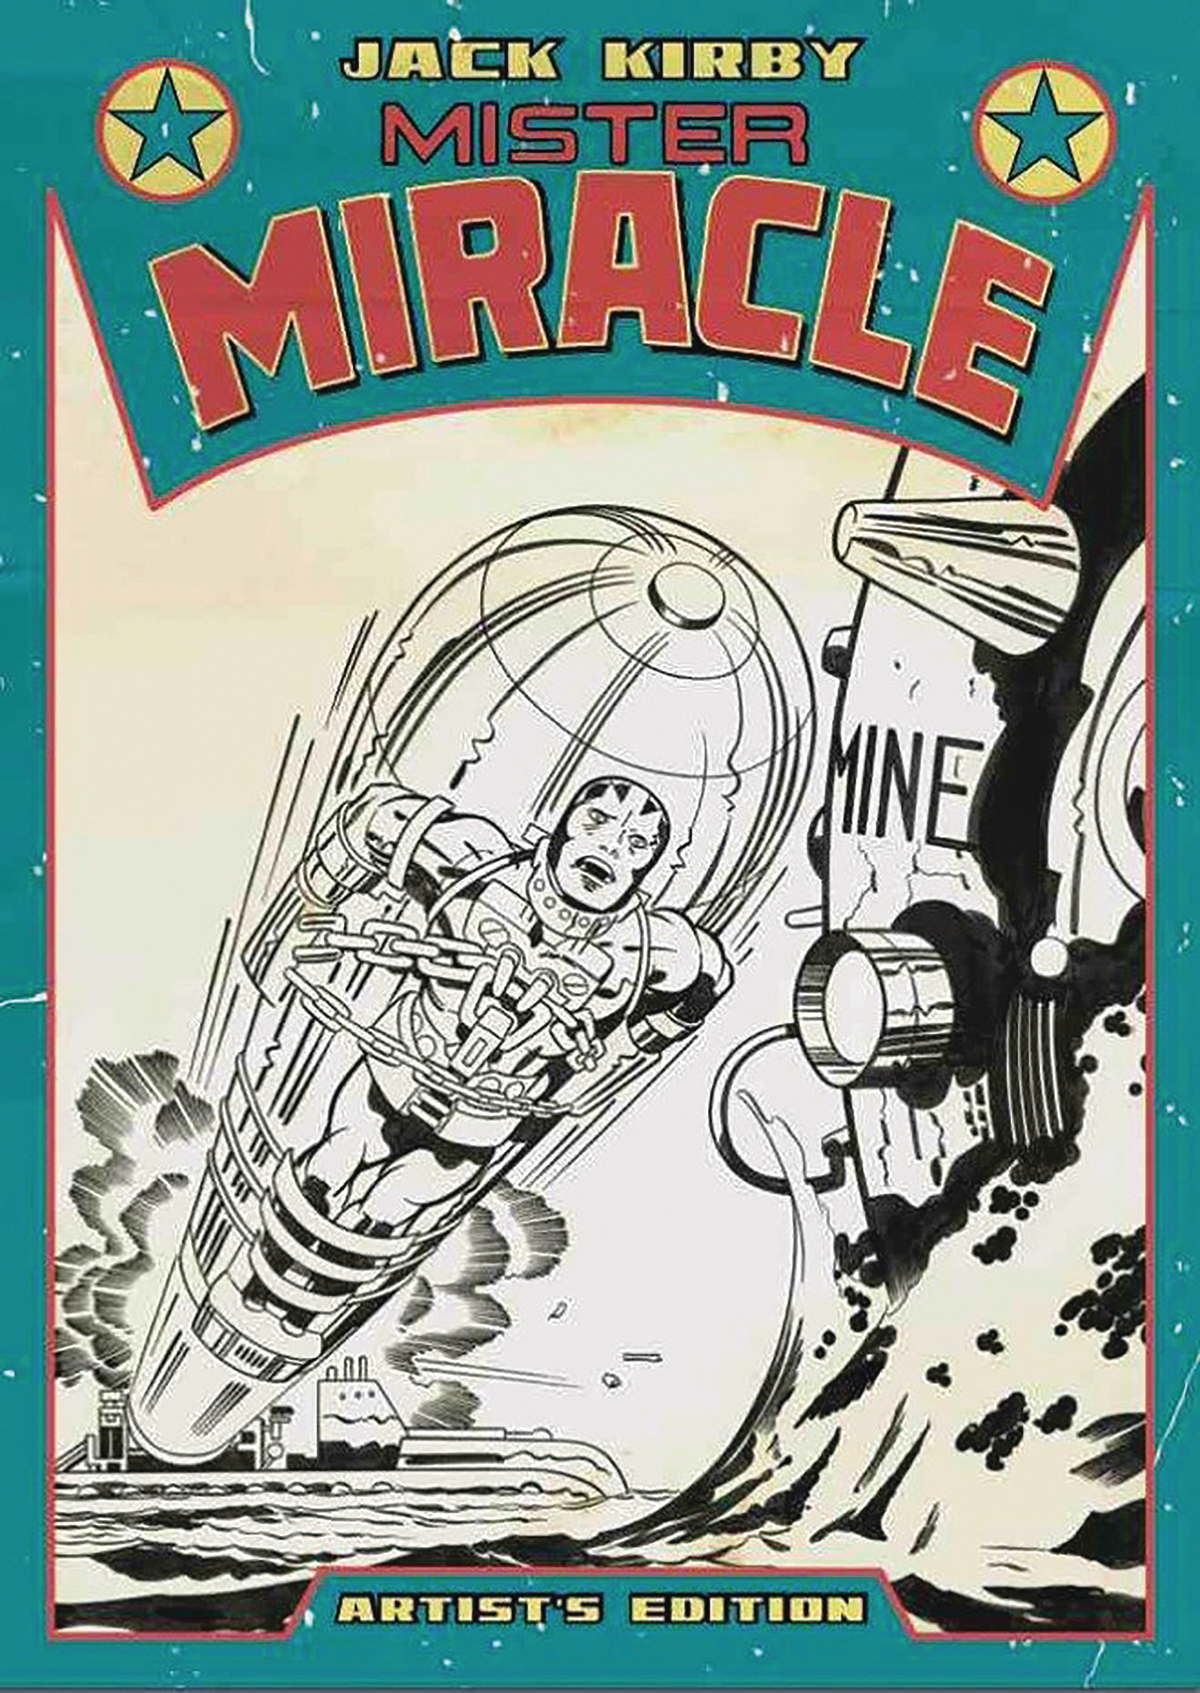 Jack Kirby Mister Miracle Artist Edition Hardcover